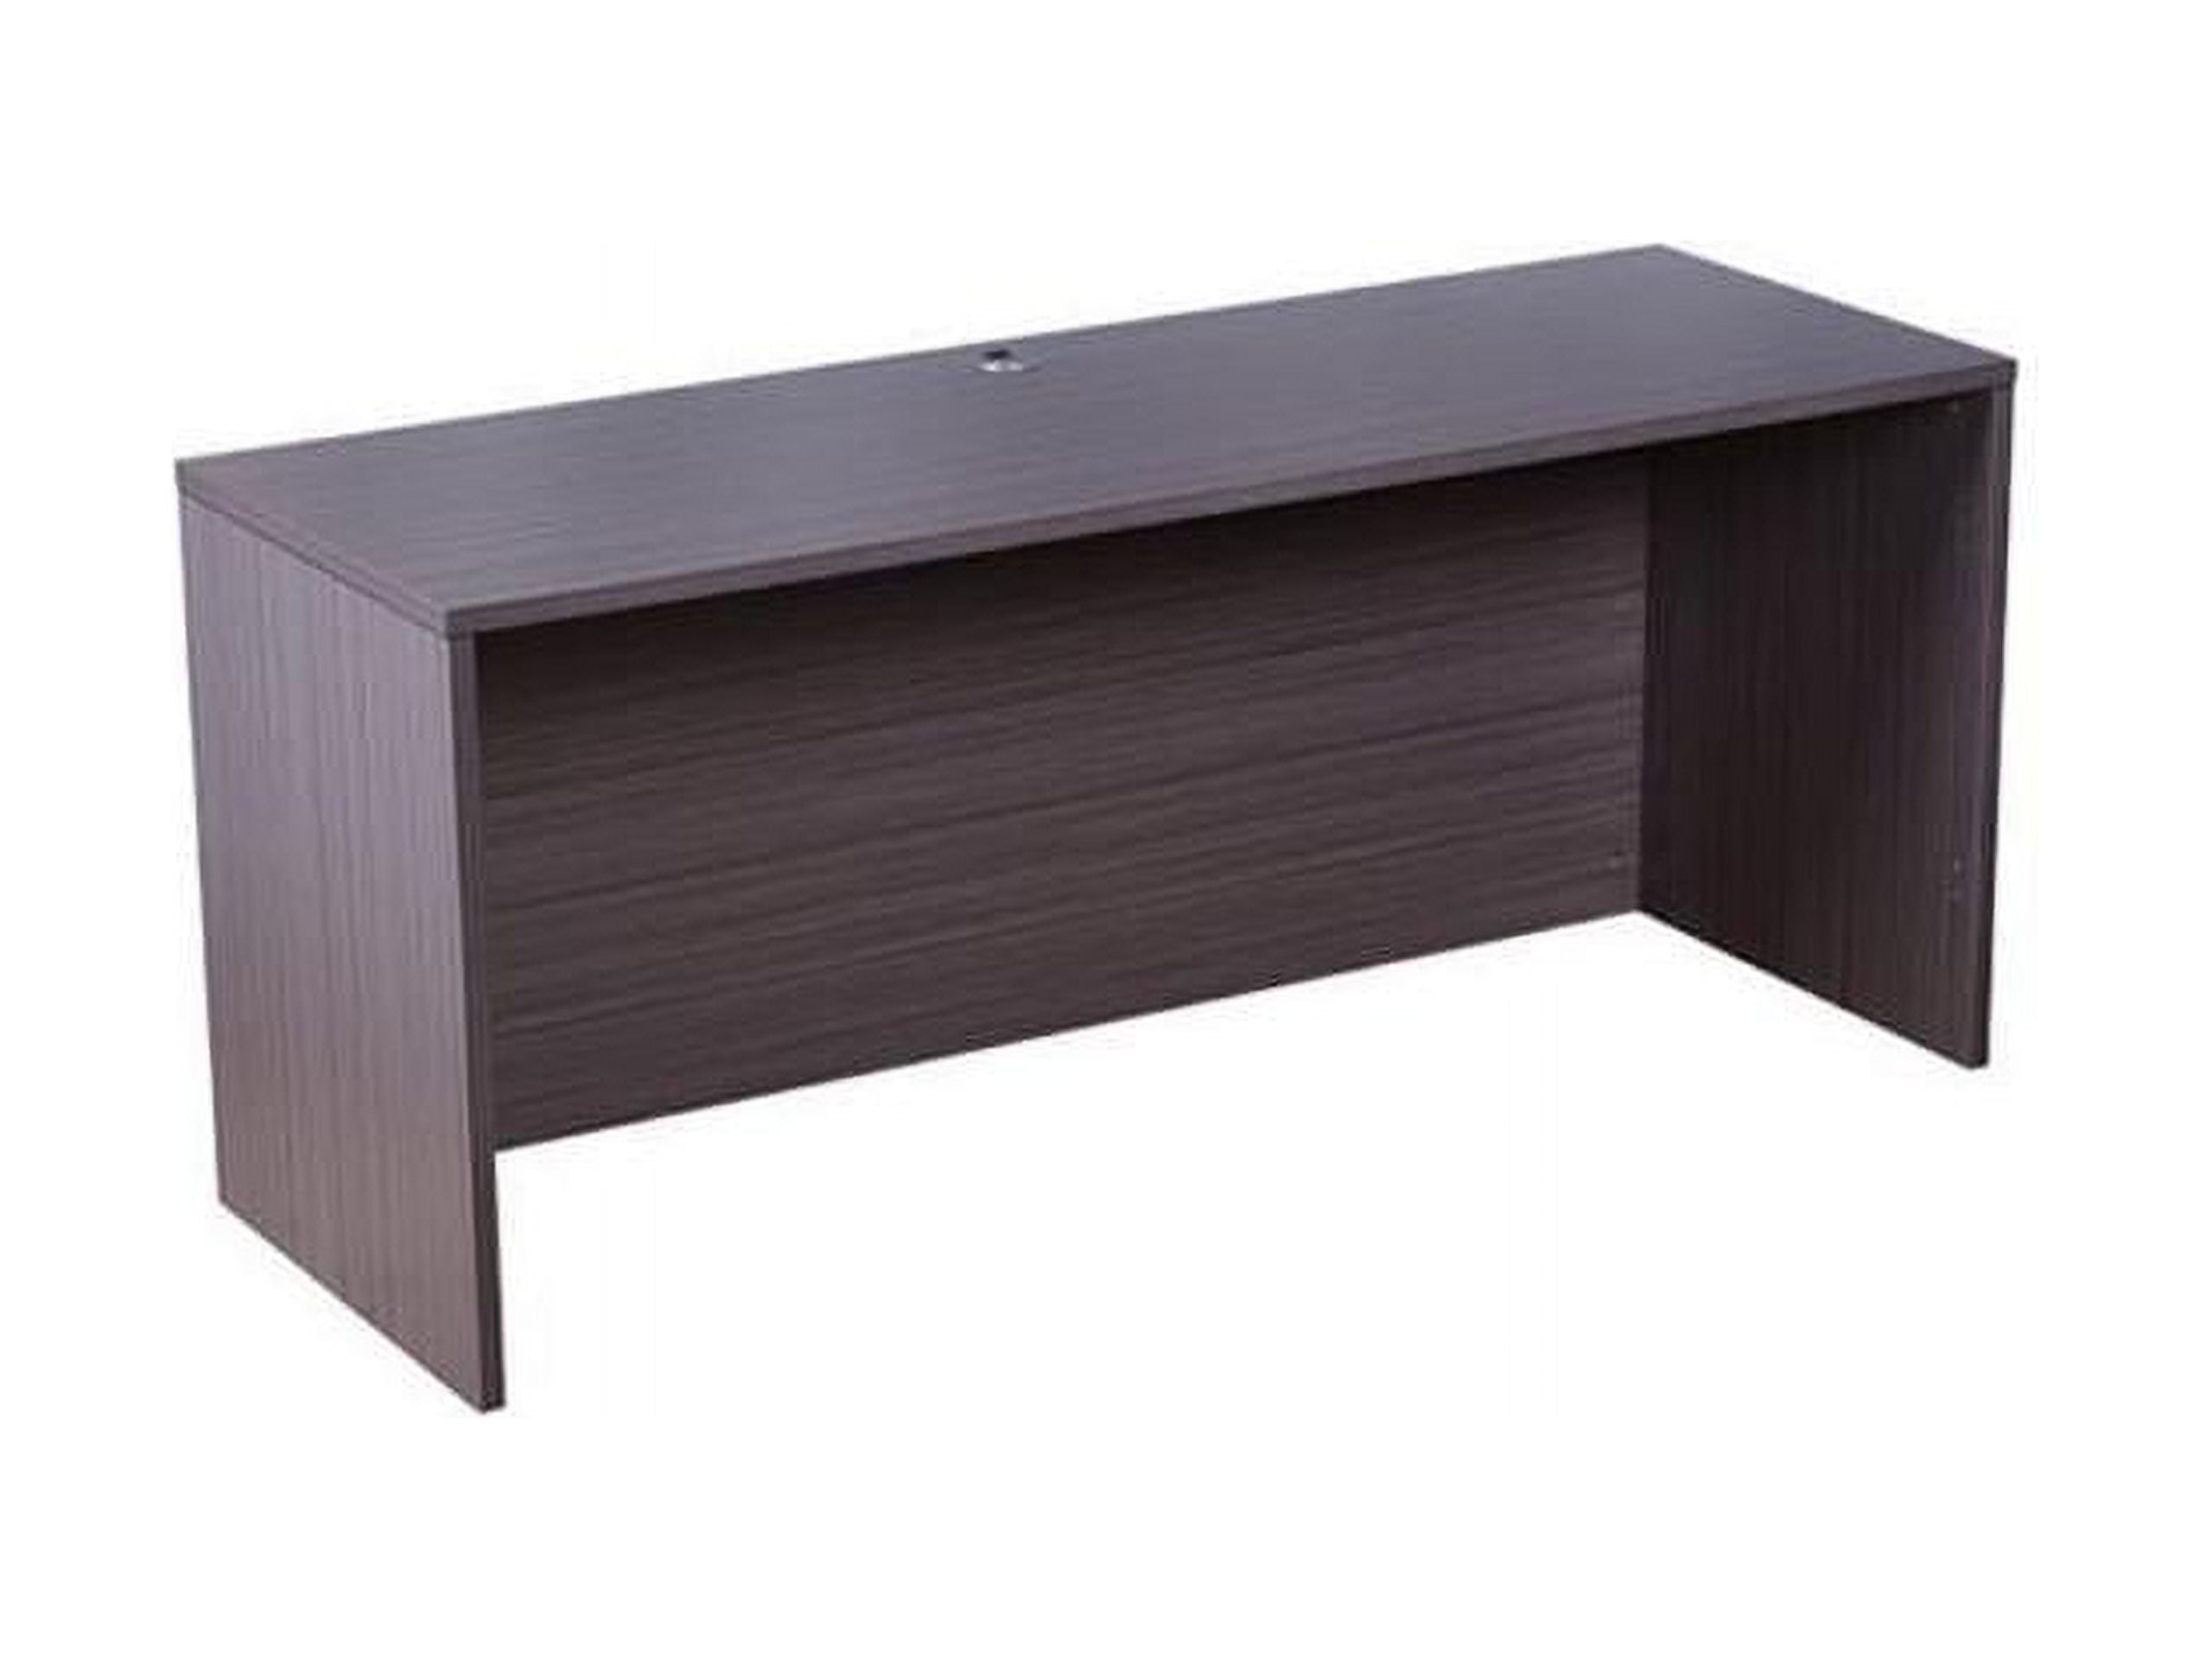 N111-dw 66 In. Credenza Shell Driftwood